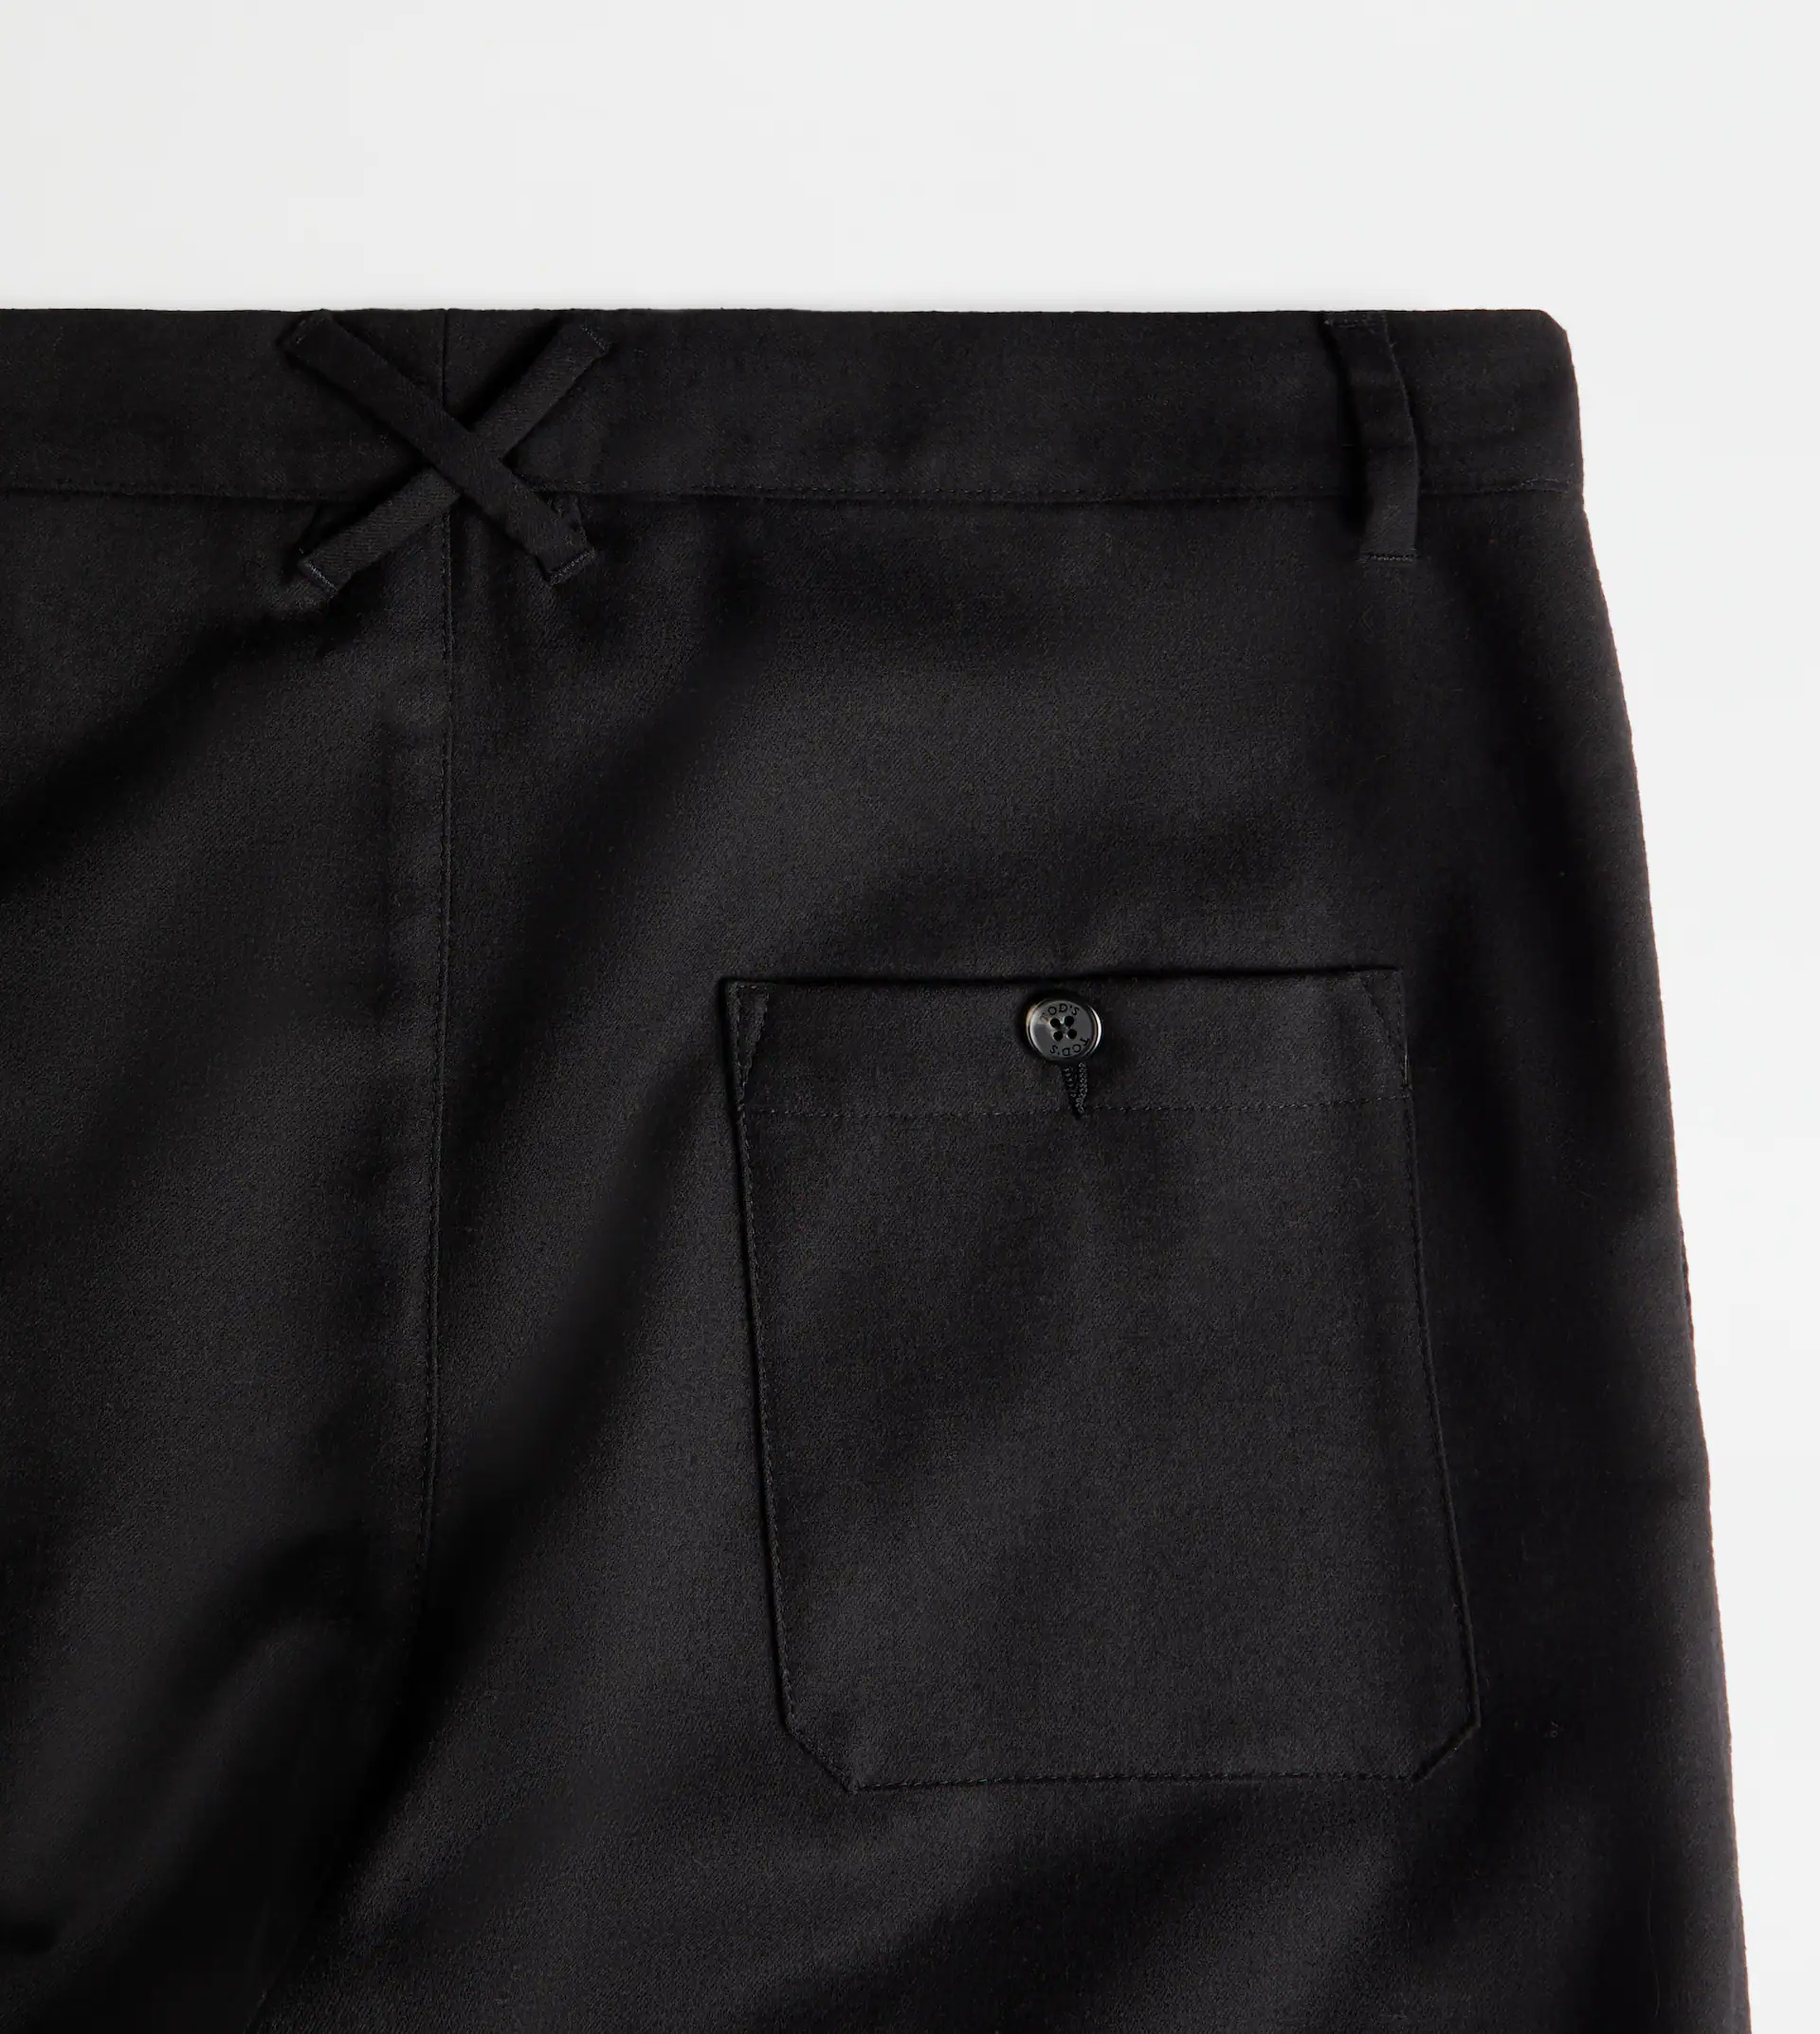 TOD'S CHINO TROUSERS ADJUSTABLE WAISTBAND - BLACK - 9